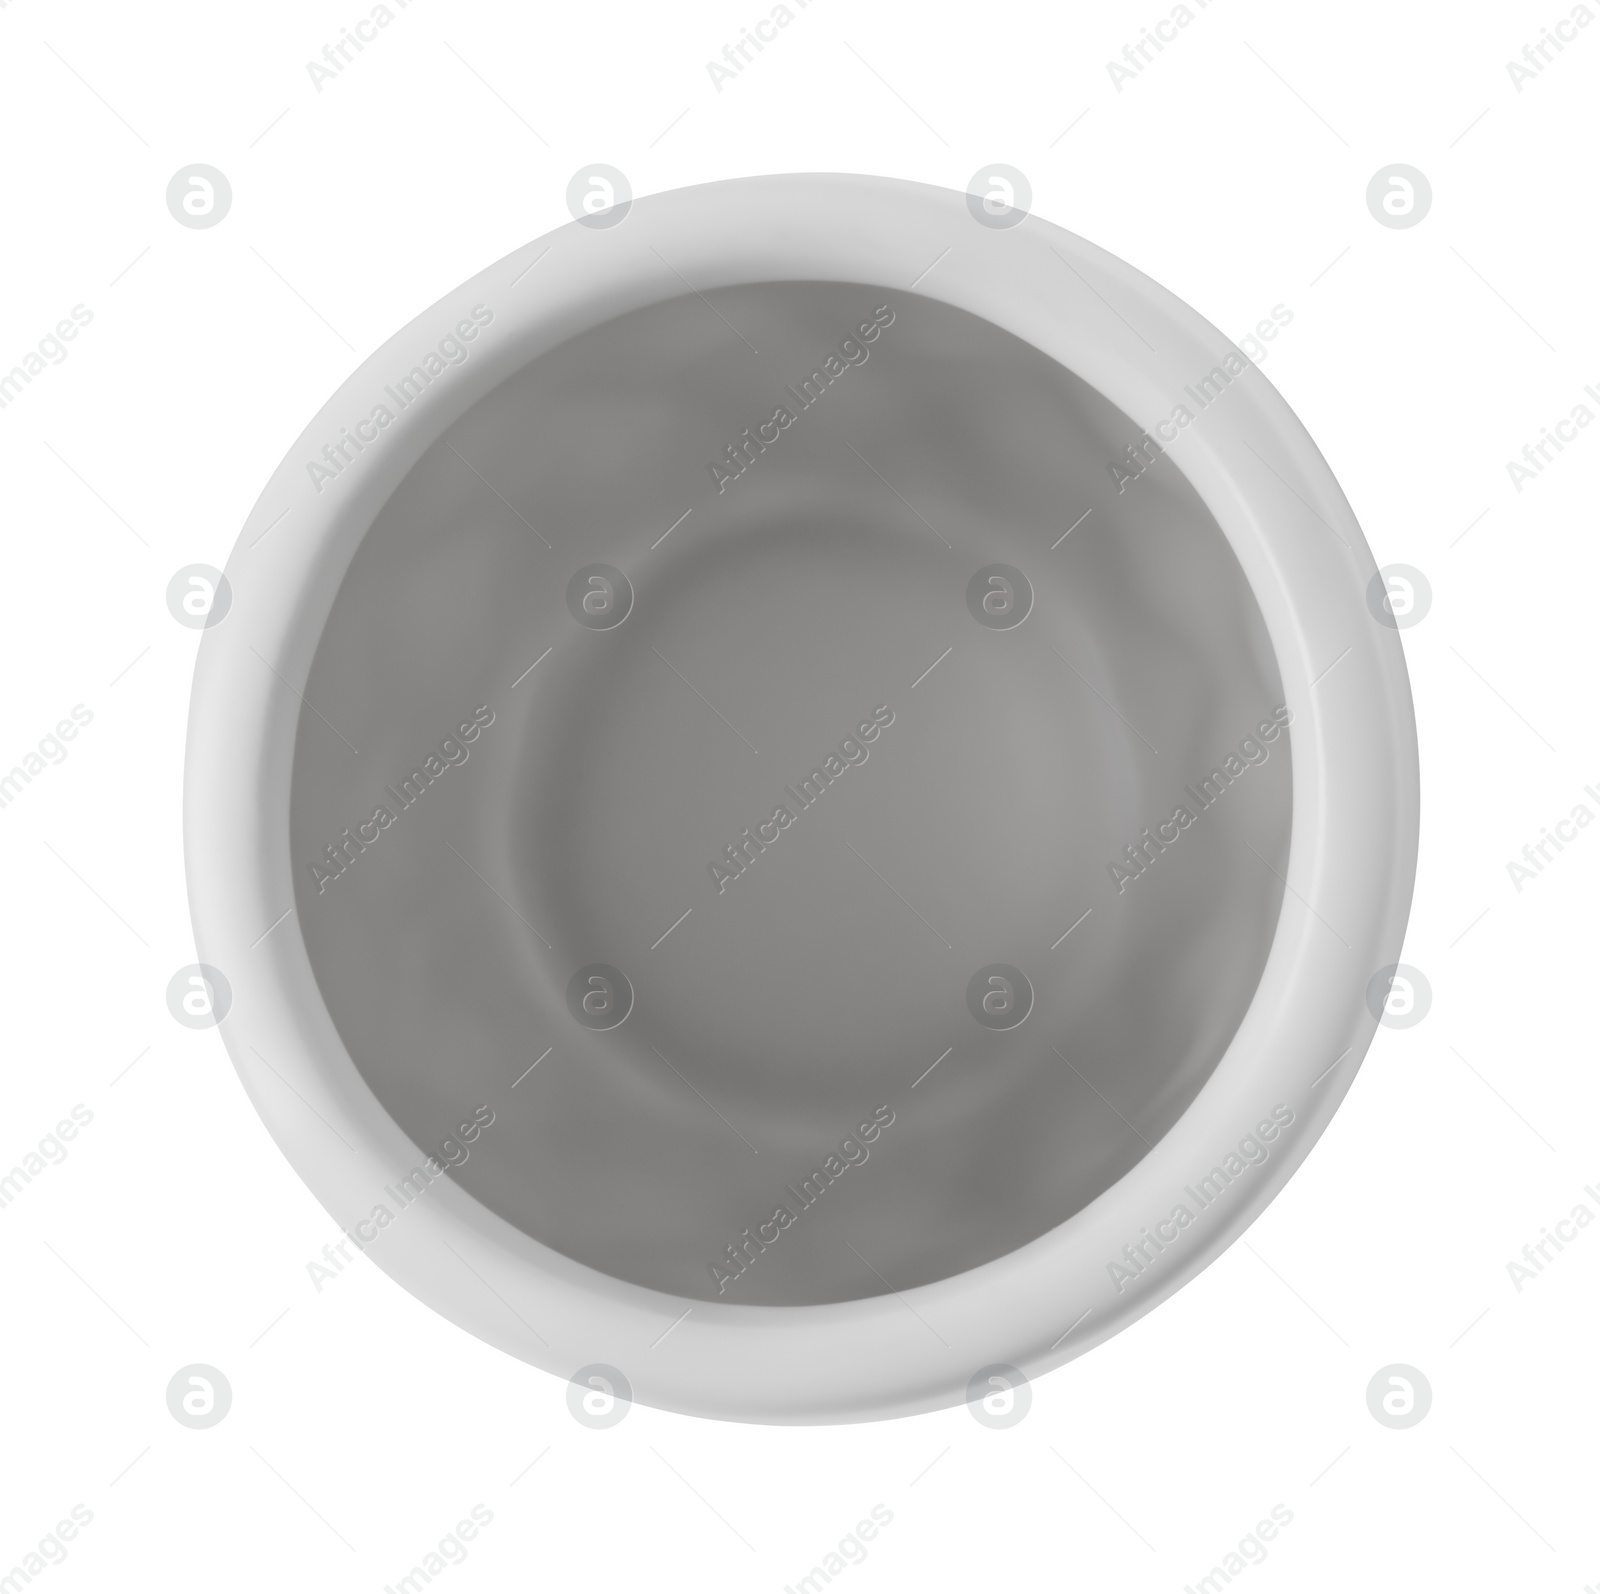 Photo of Bath accessory. Ceramic toothbrush holder isolated on white, top view